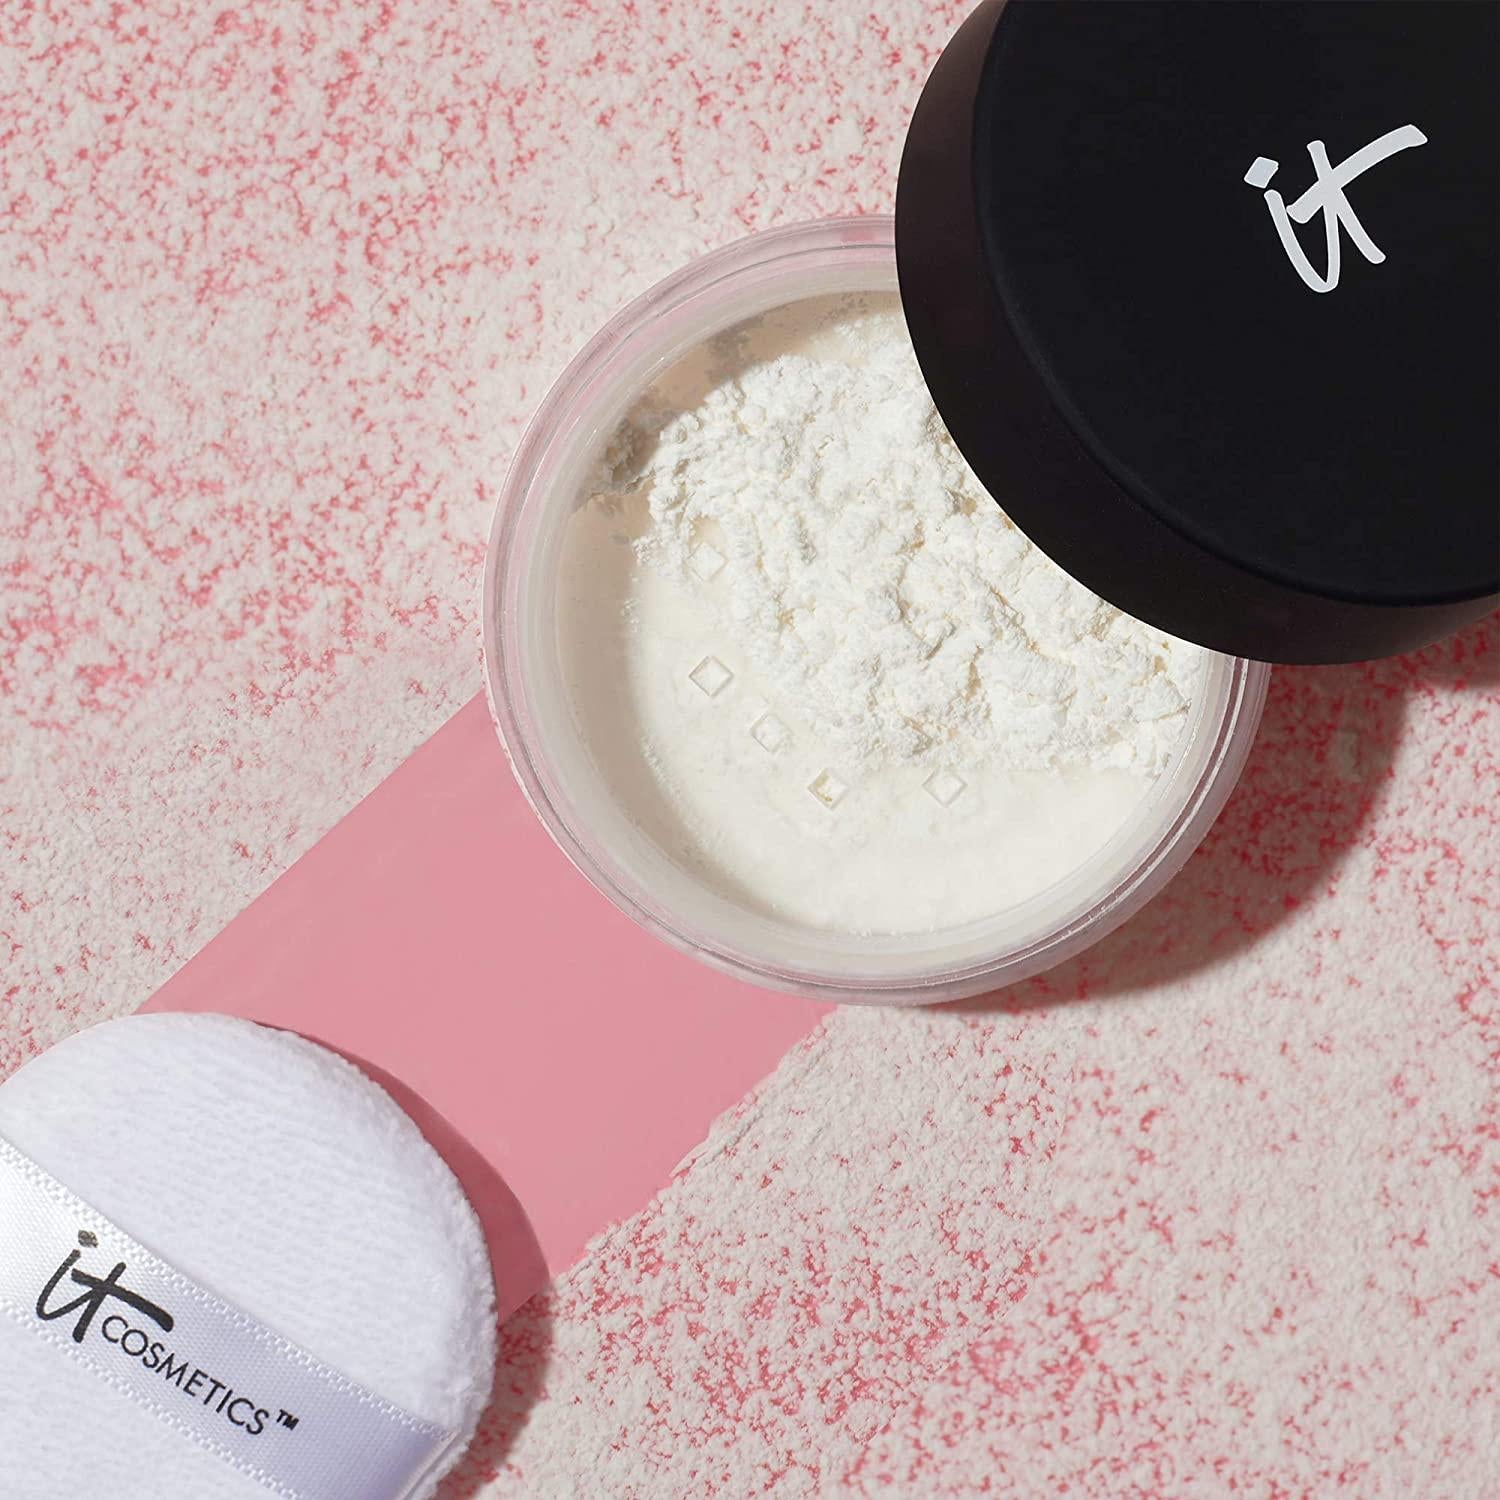 It Cosmetics by by pore loose powder